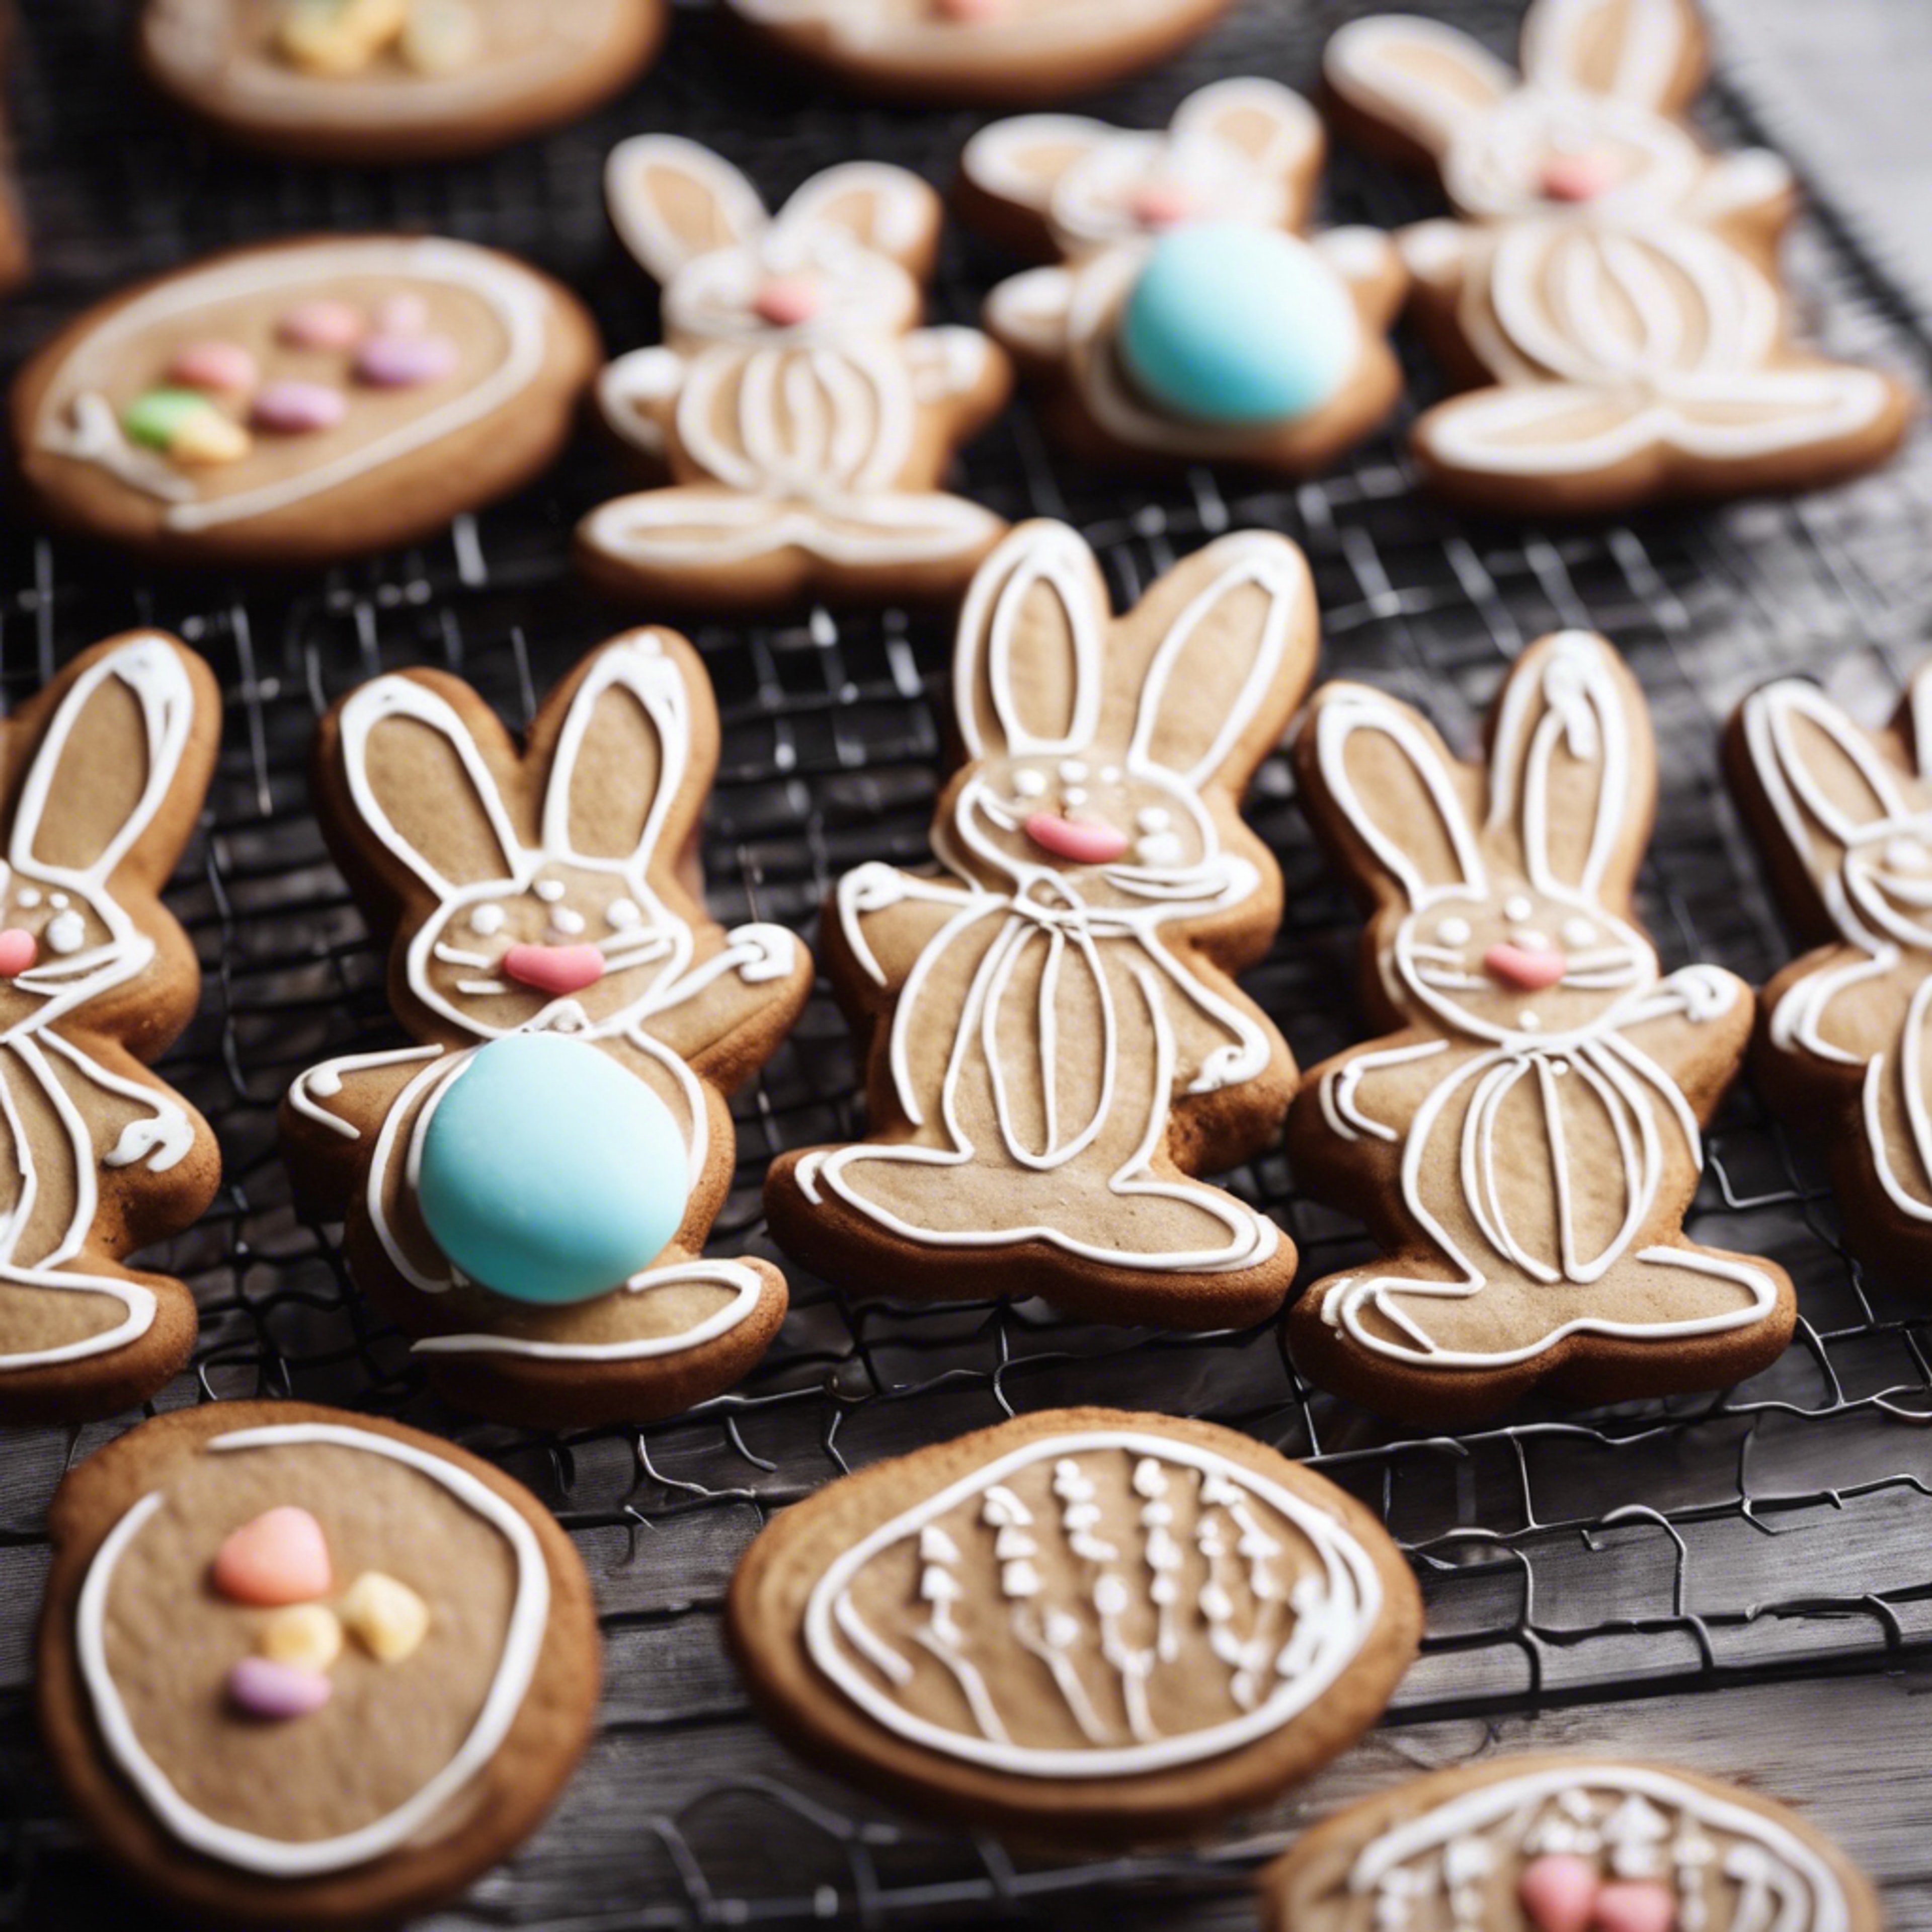 Homemade gingerbread cookies shaped like Easter bunnies and eggs, cooling on a rack. Шпалери[c62694eb033d400aa62f]